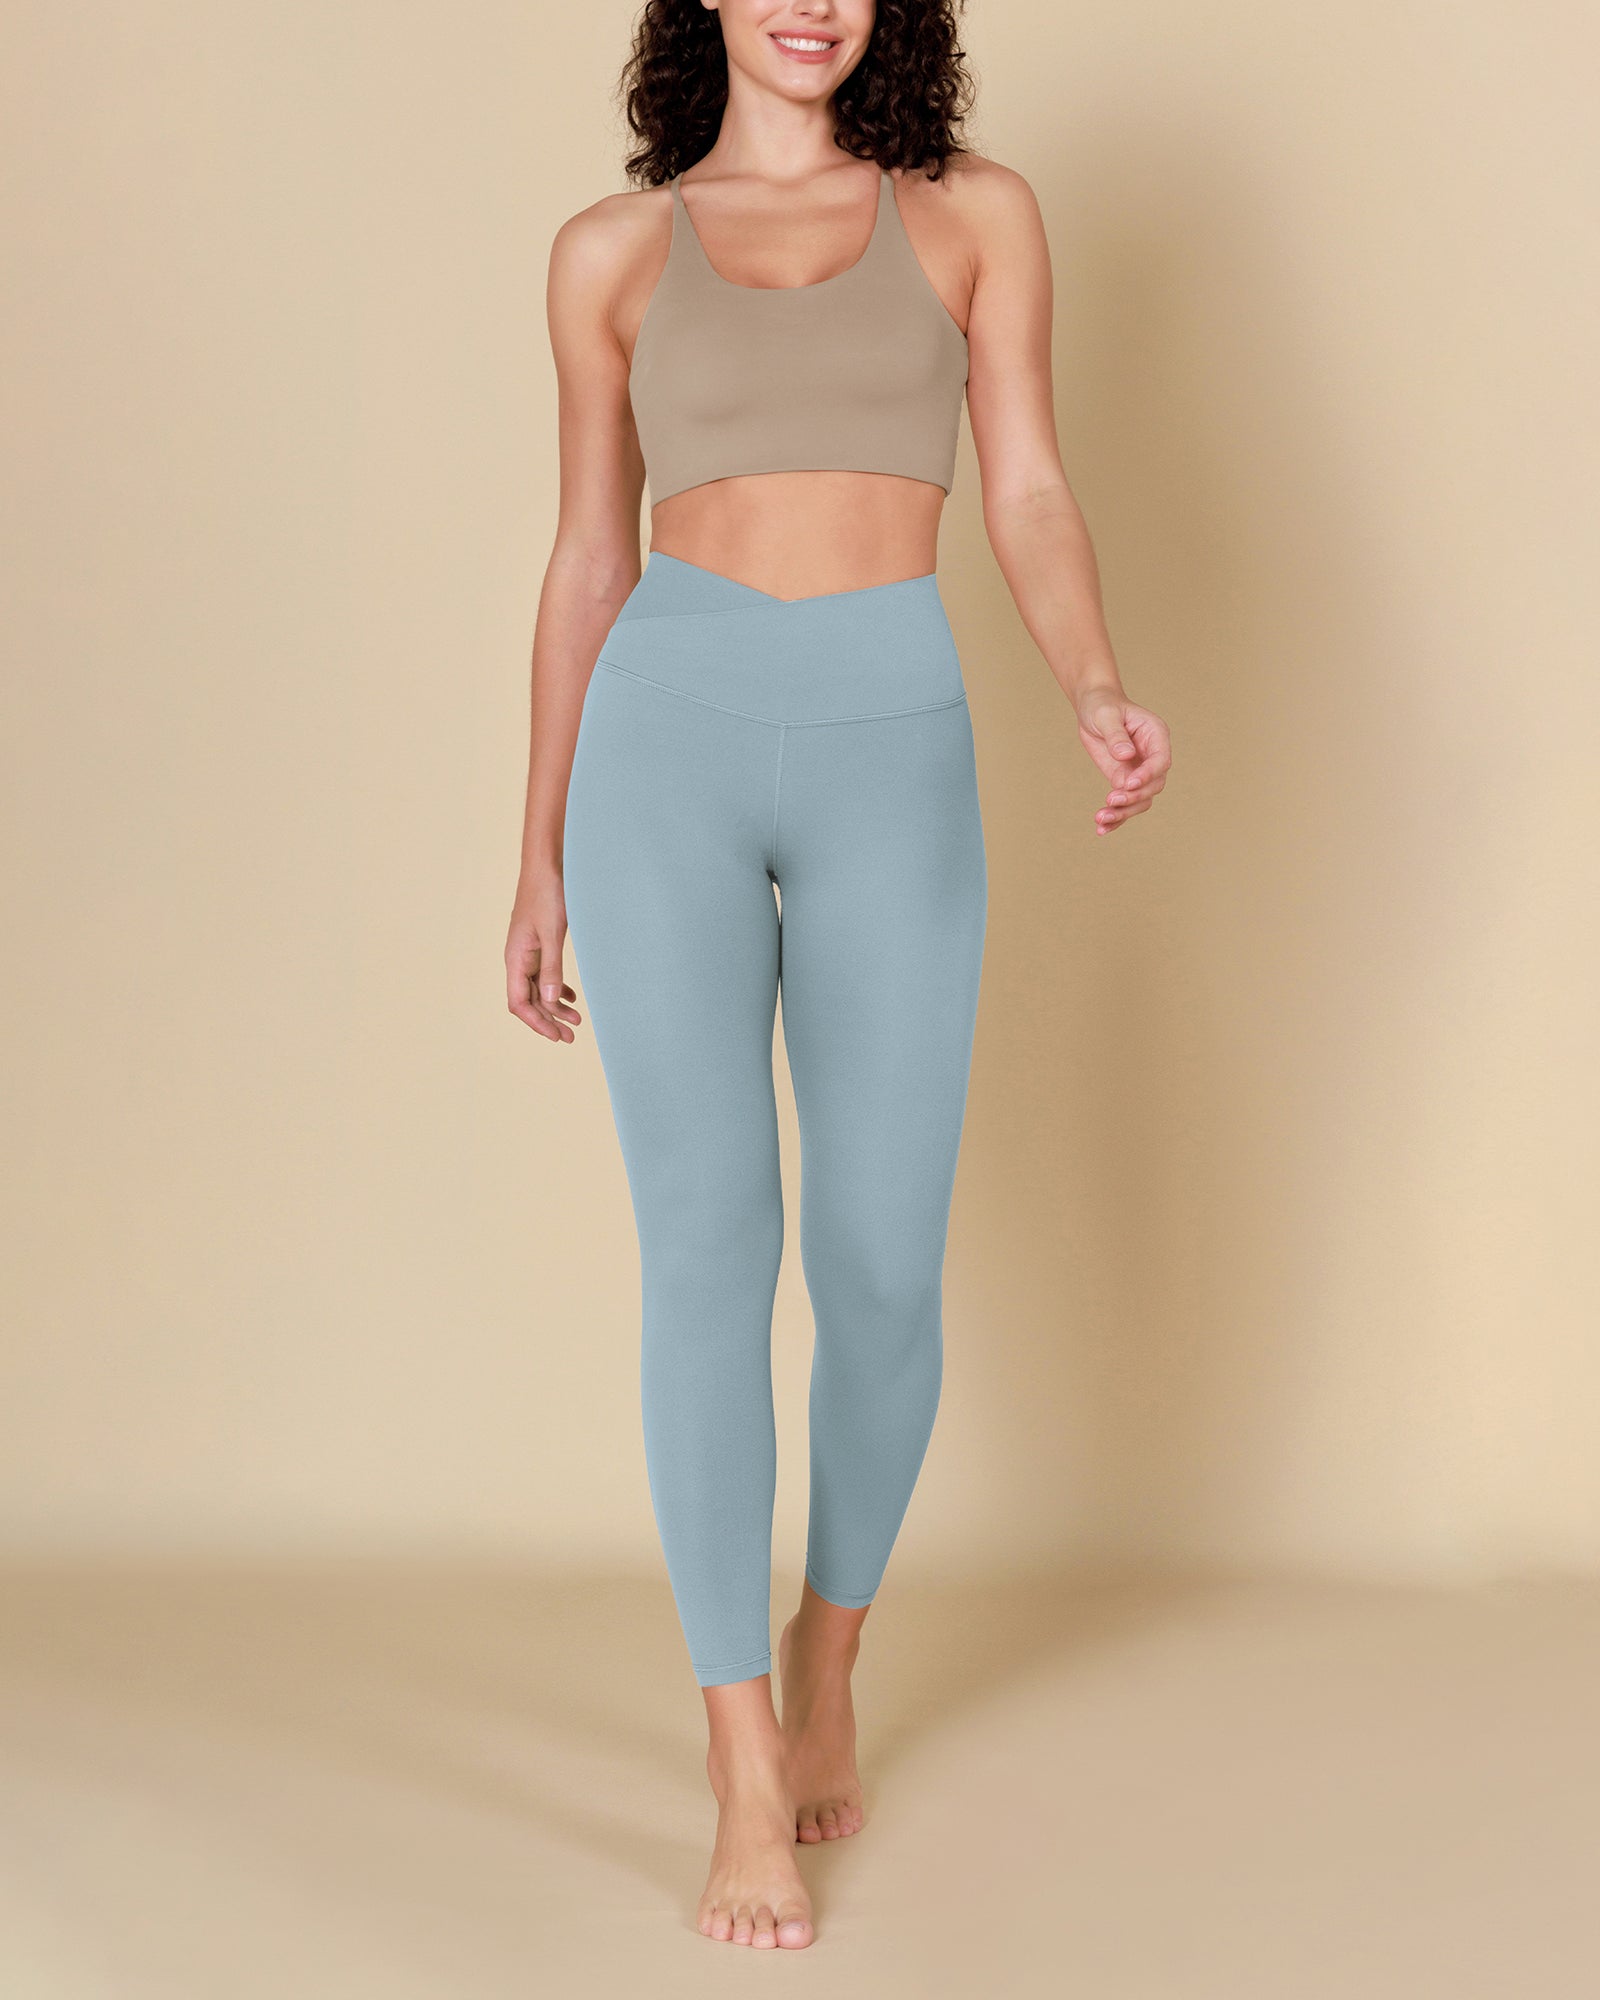 ODCLOUD Crossover 7/8 Leggings with Back Pocket - ododos